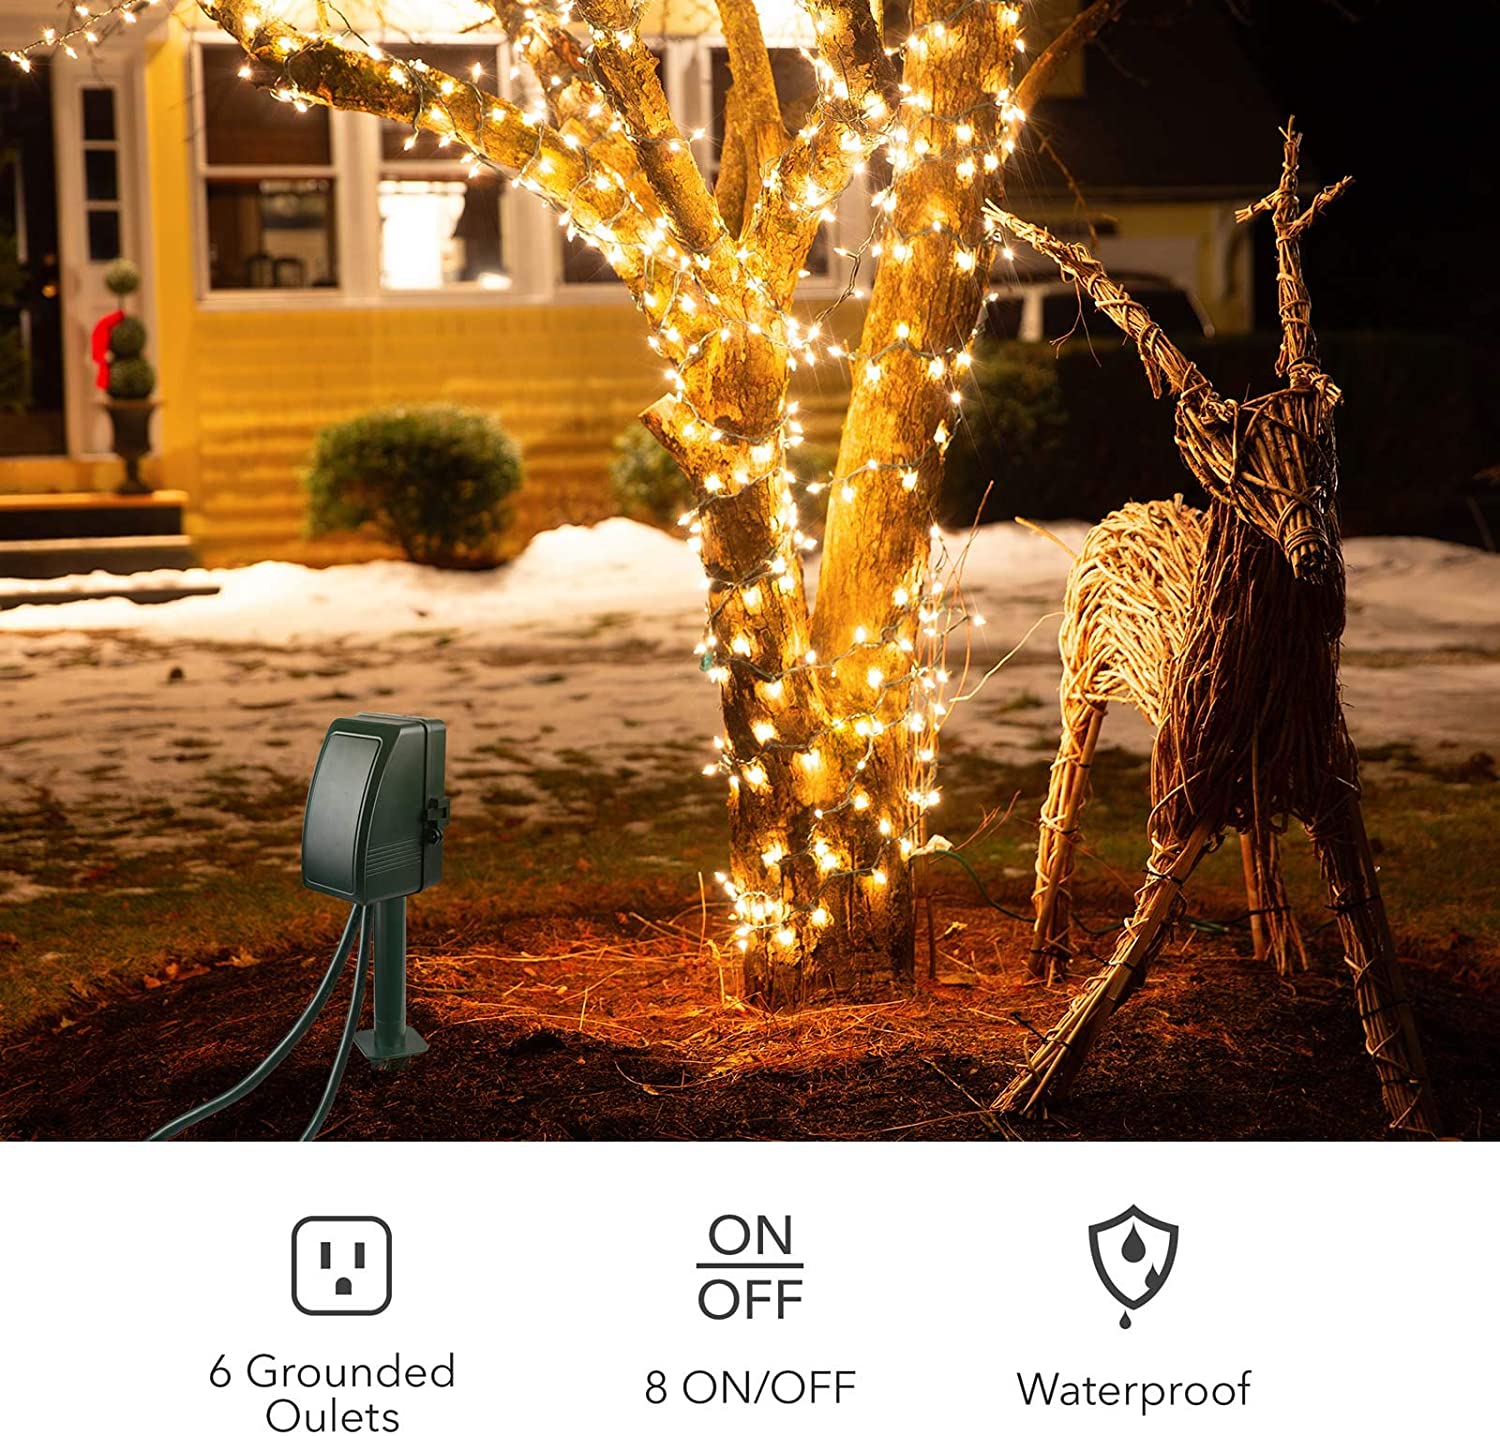 7 Day Heavy Duty Outdoor Digital Stake Timer 6 Outlets BN-LINK - BN-LINK